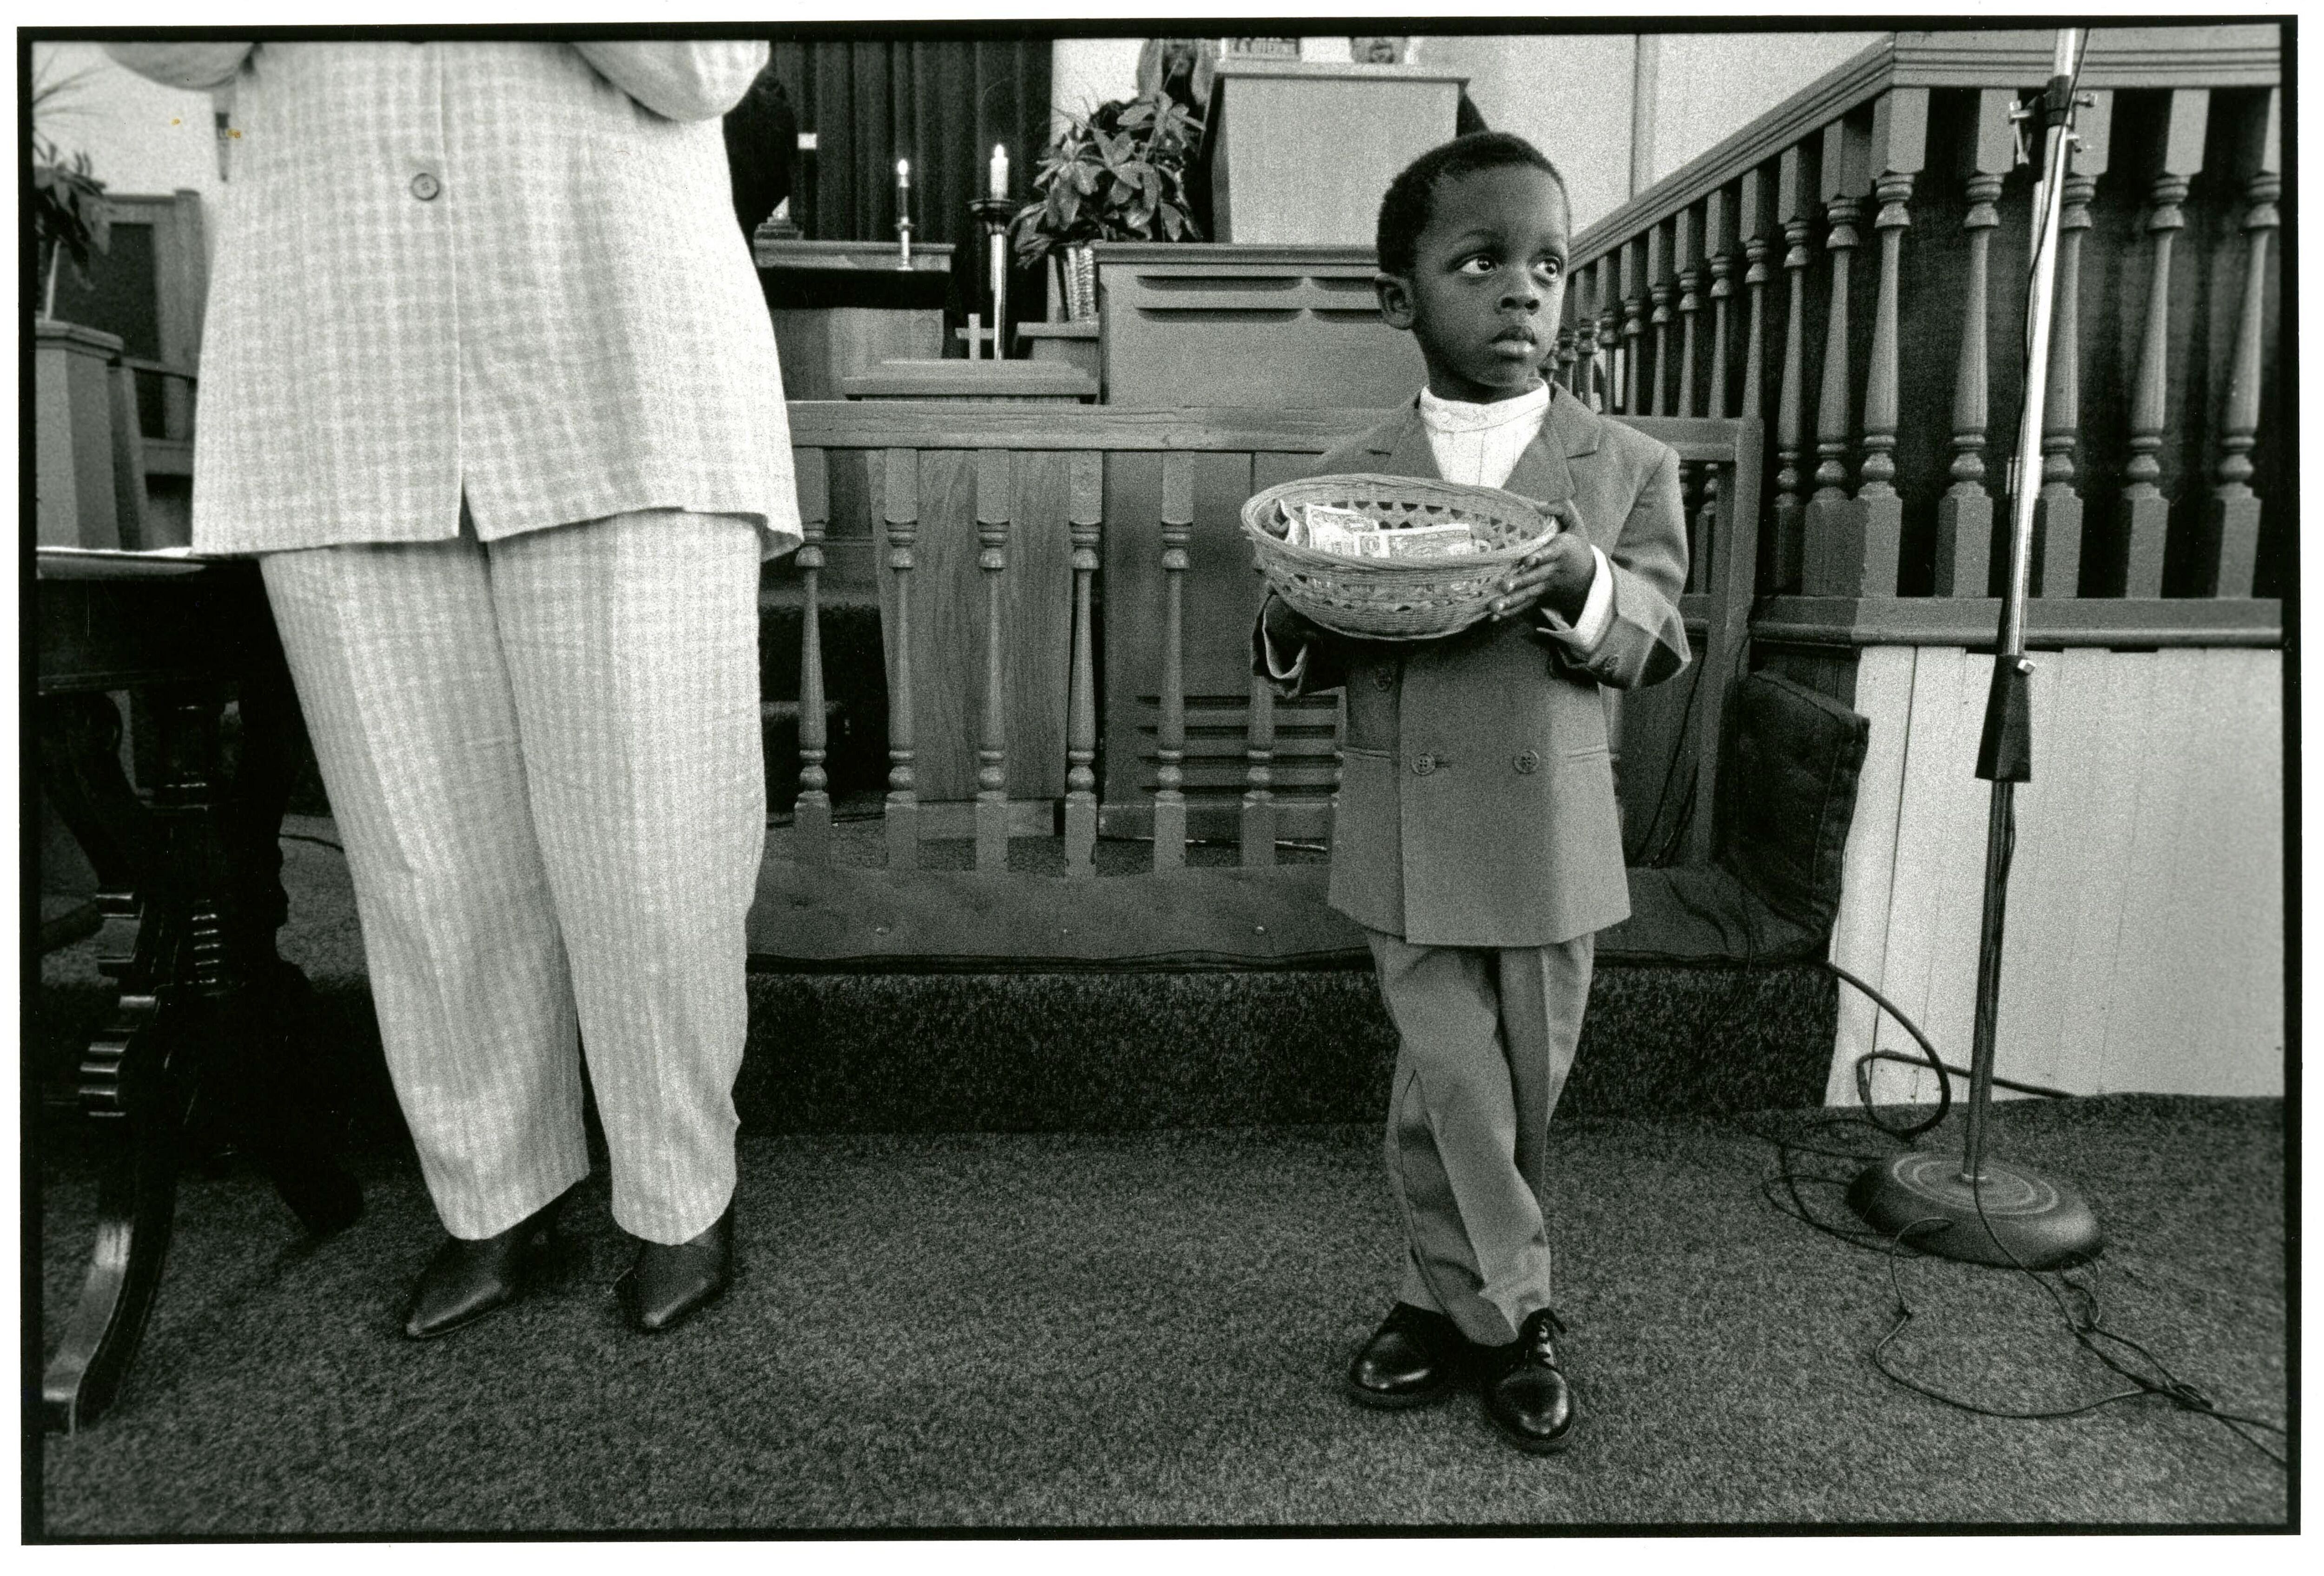 A black and white photograph of a child in a suit holding a donation basket in front of a church alter. Next to him is the lower half of an adult in a white suit.